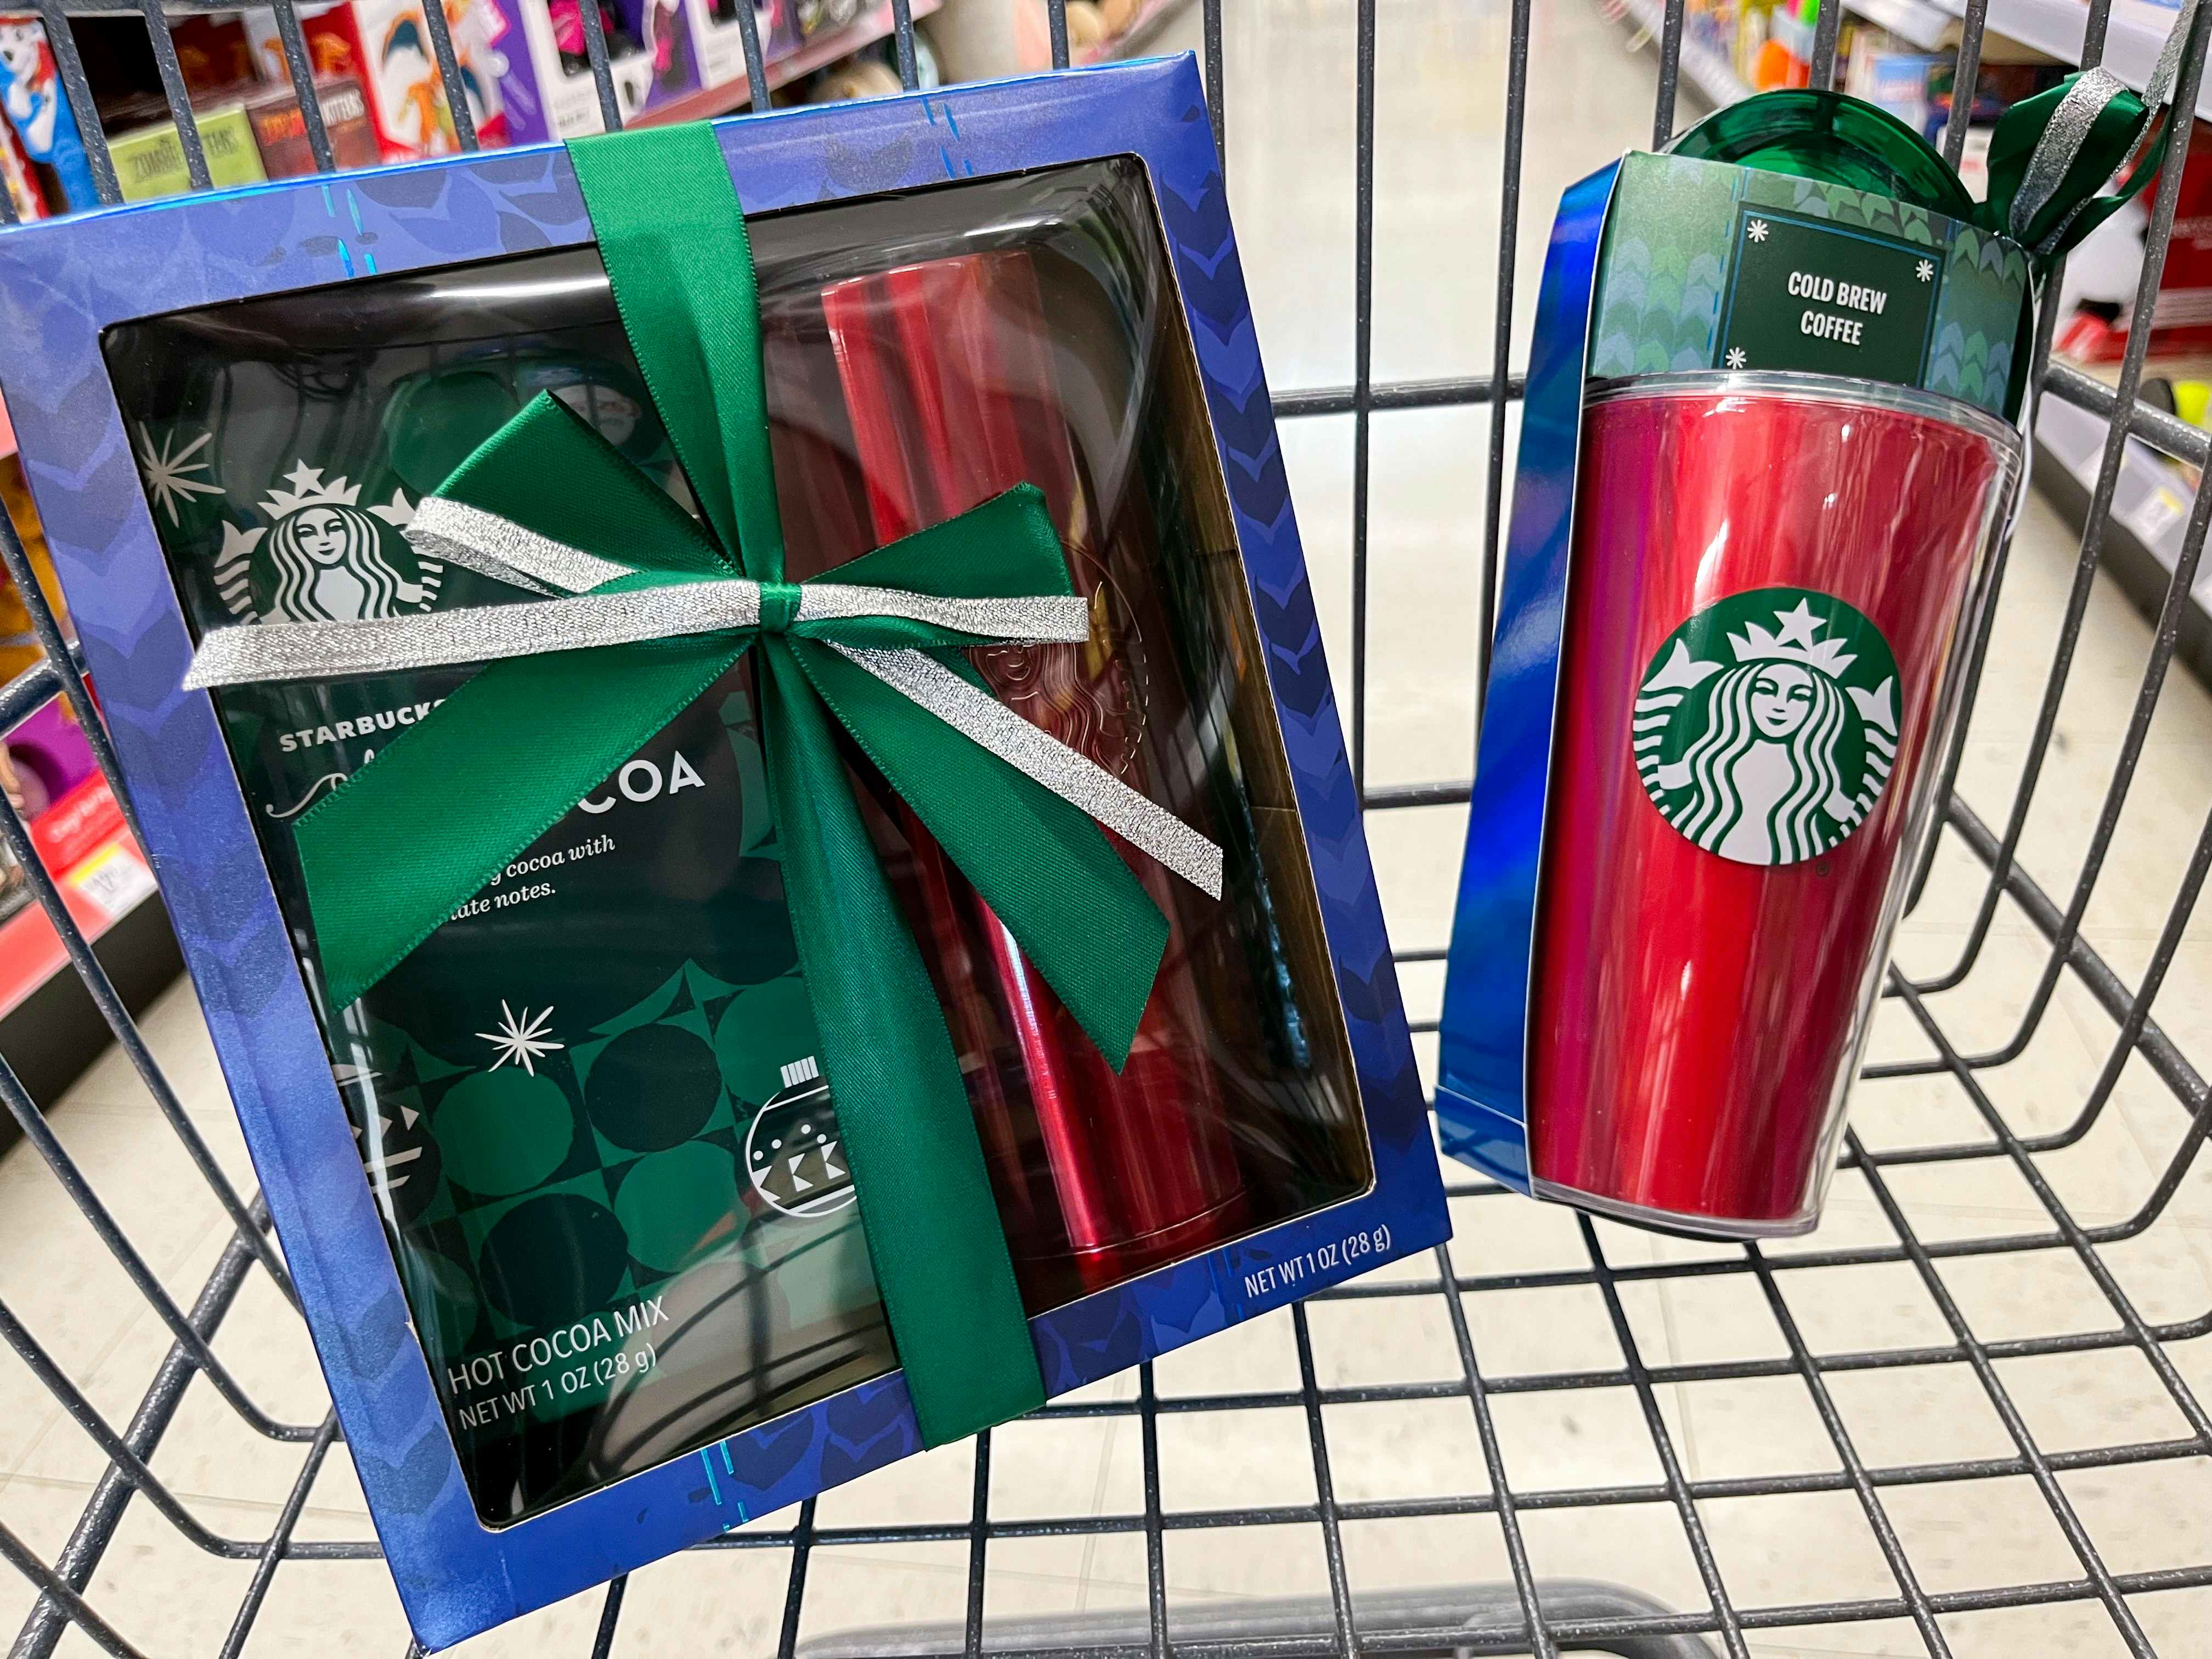 Up To 14% Off on Holiday Starbucks Gift Set